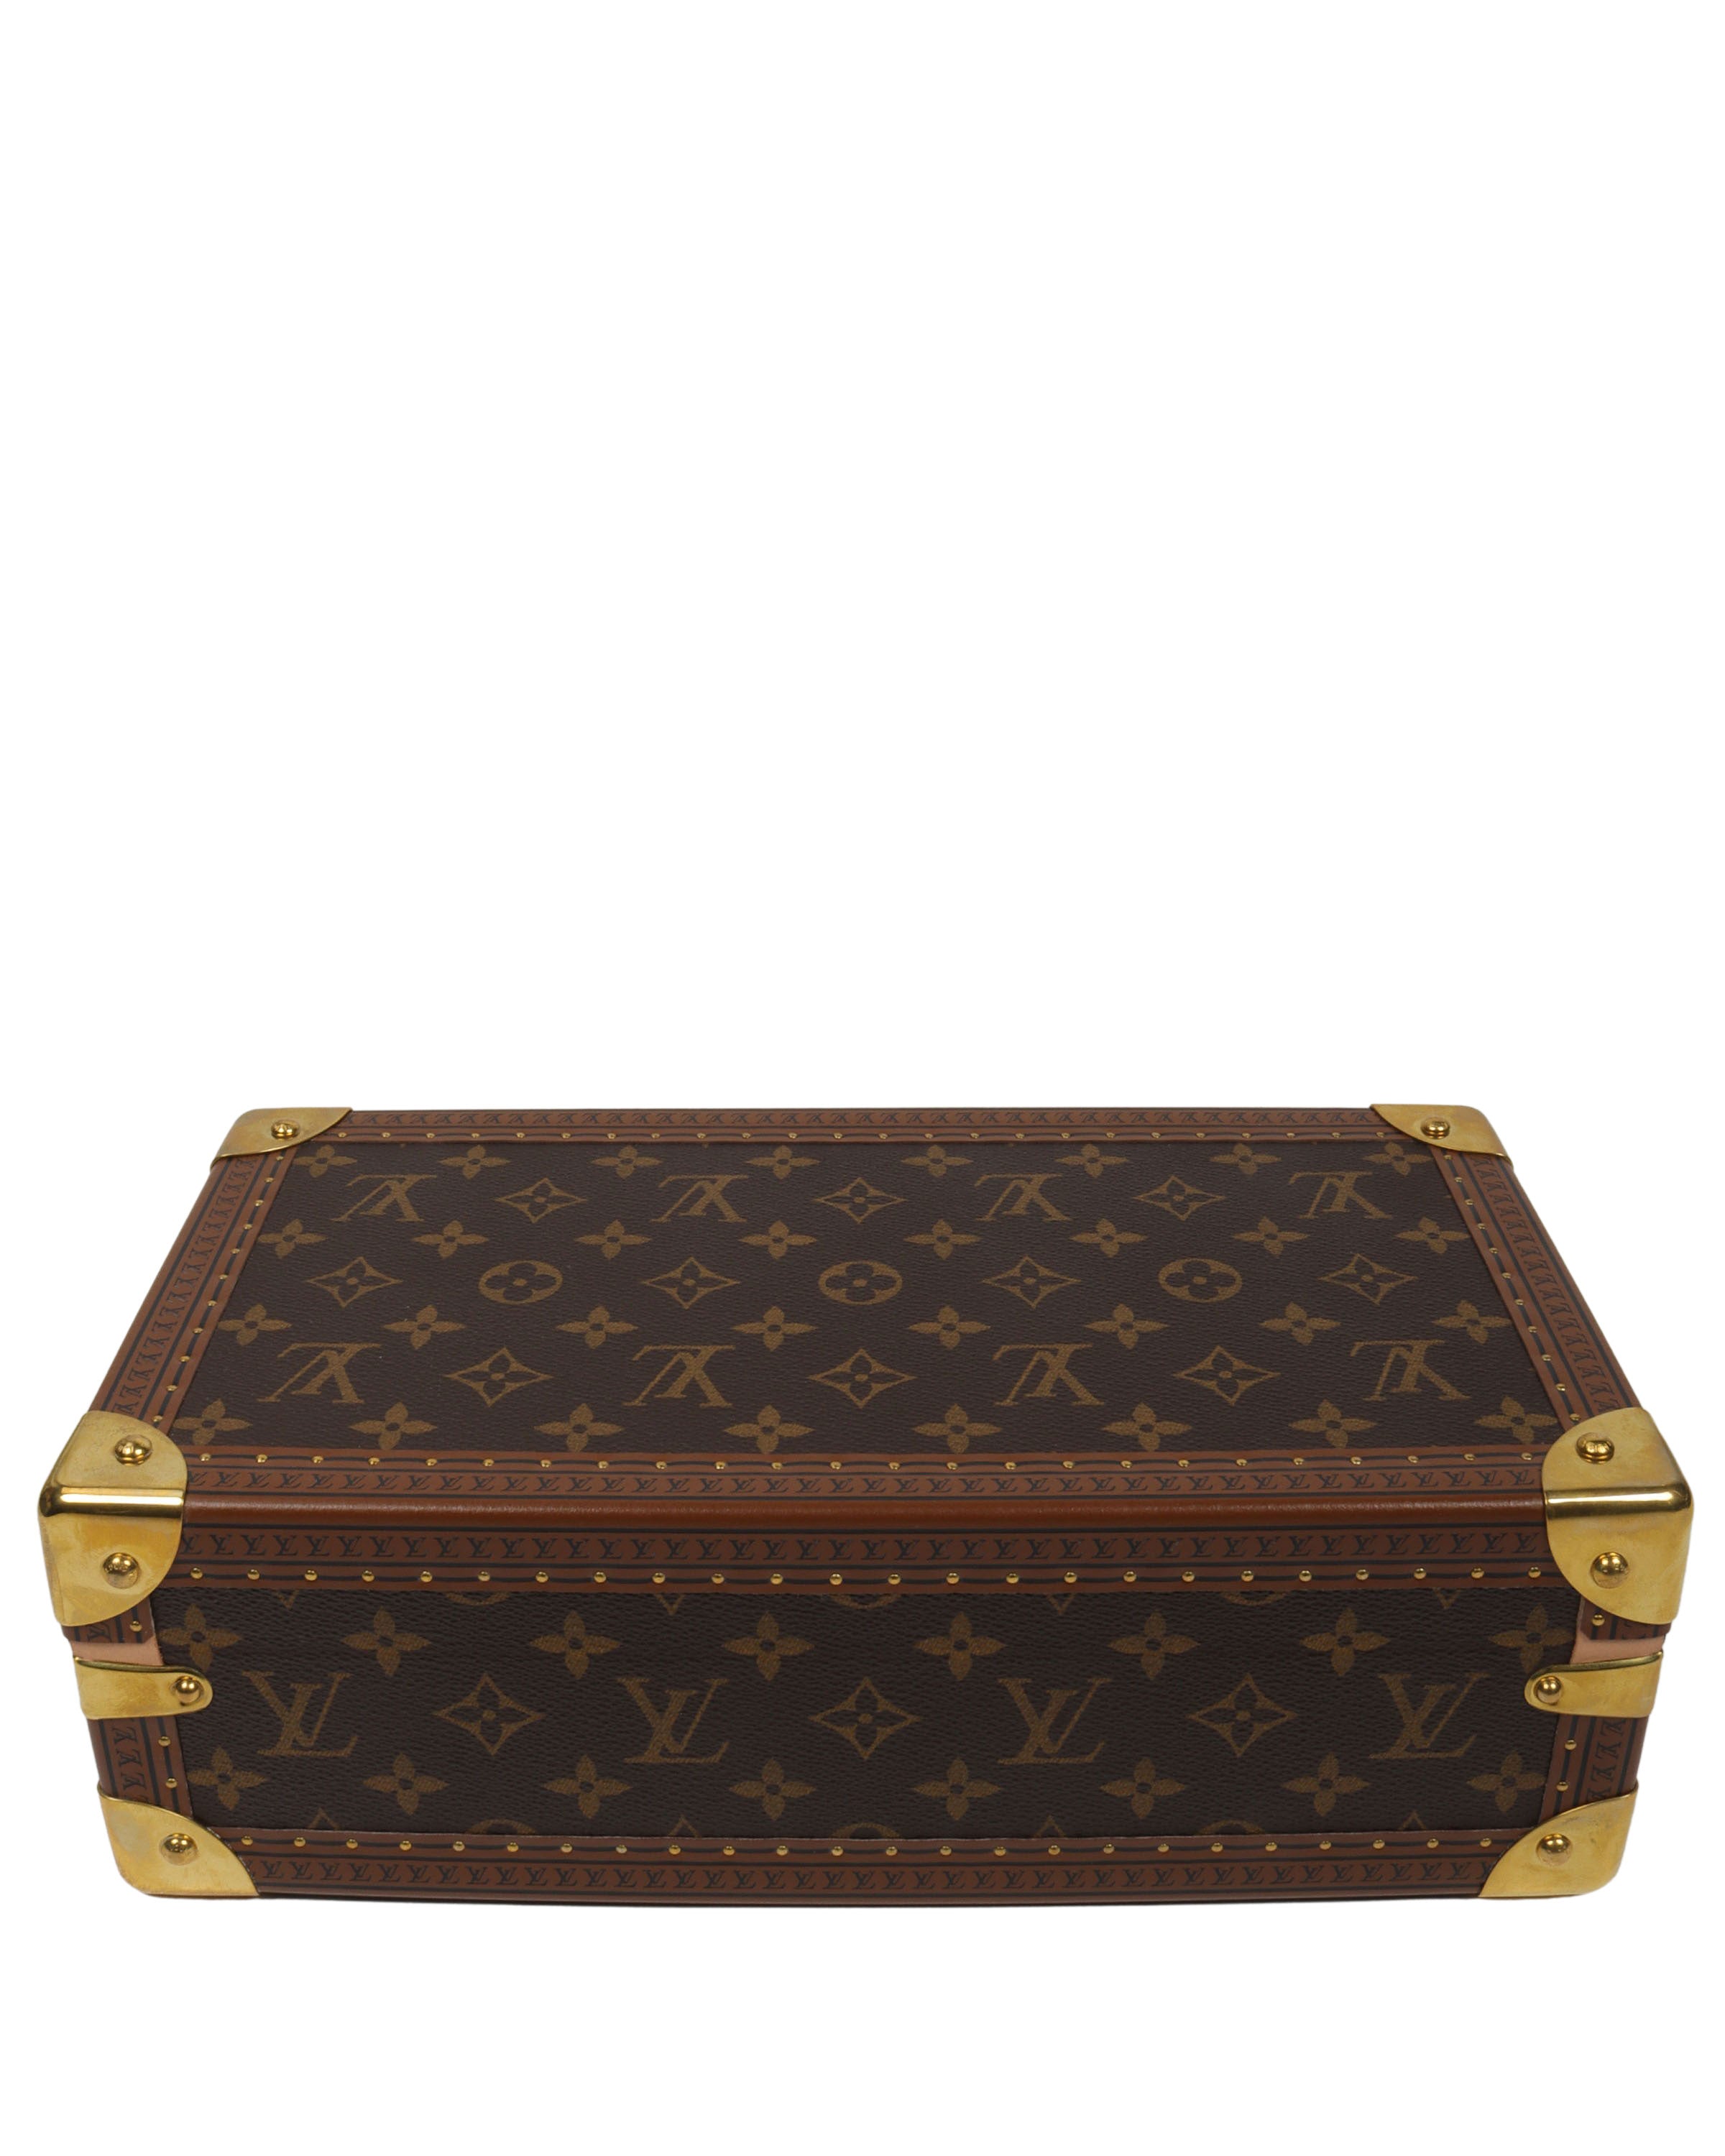 Louis Vuitton Watch Case - 5 For Sale on 1stDibs  lv watch roll case, louis  vuitton watch roll price, louis vuitton 8 watch case